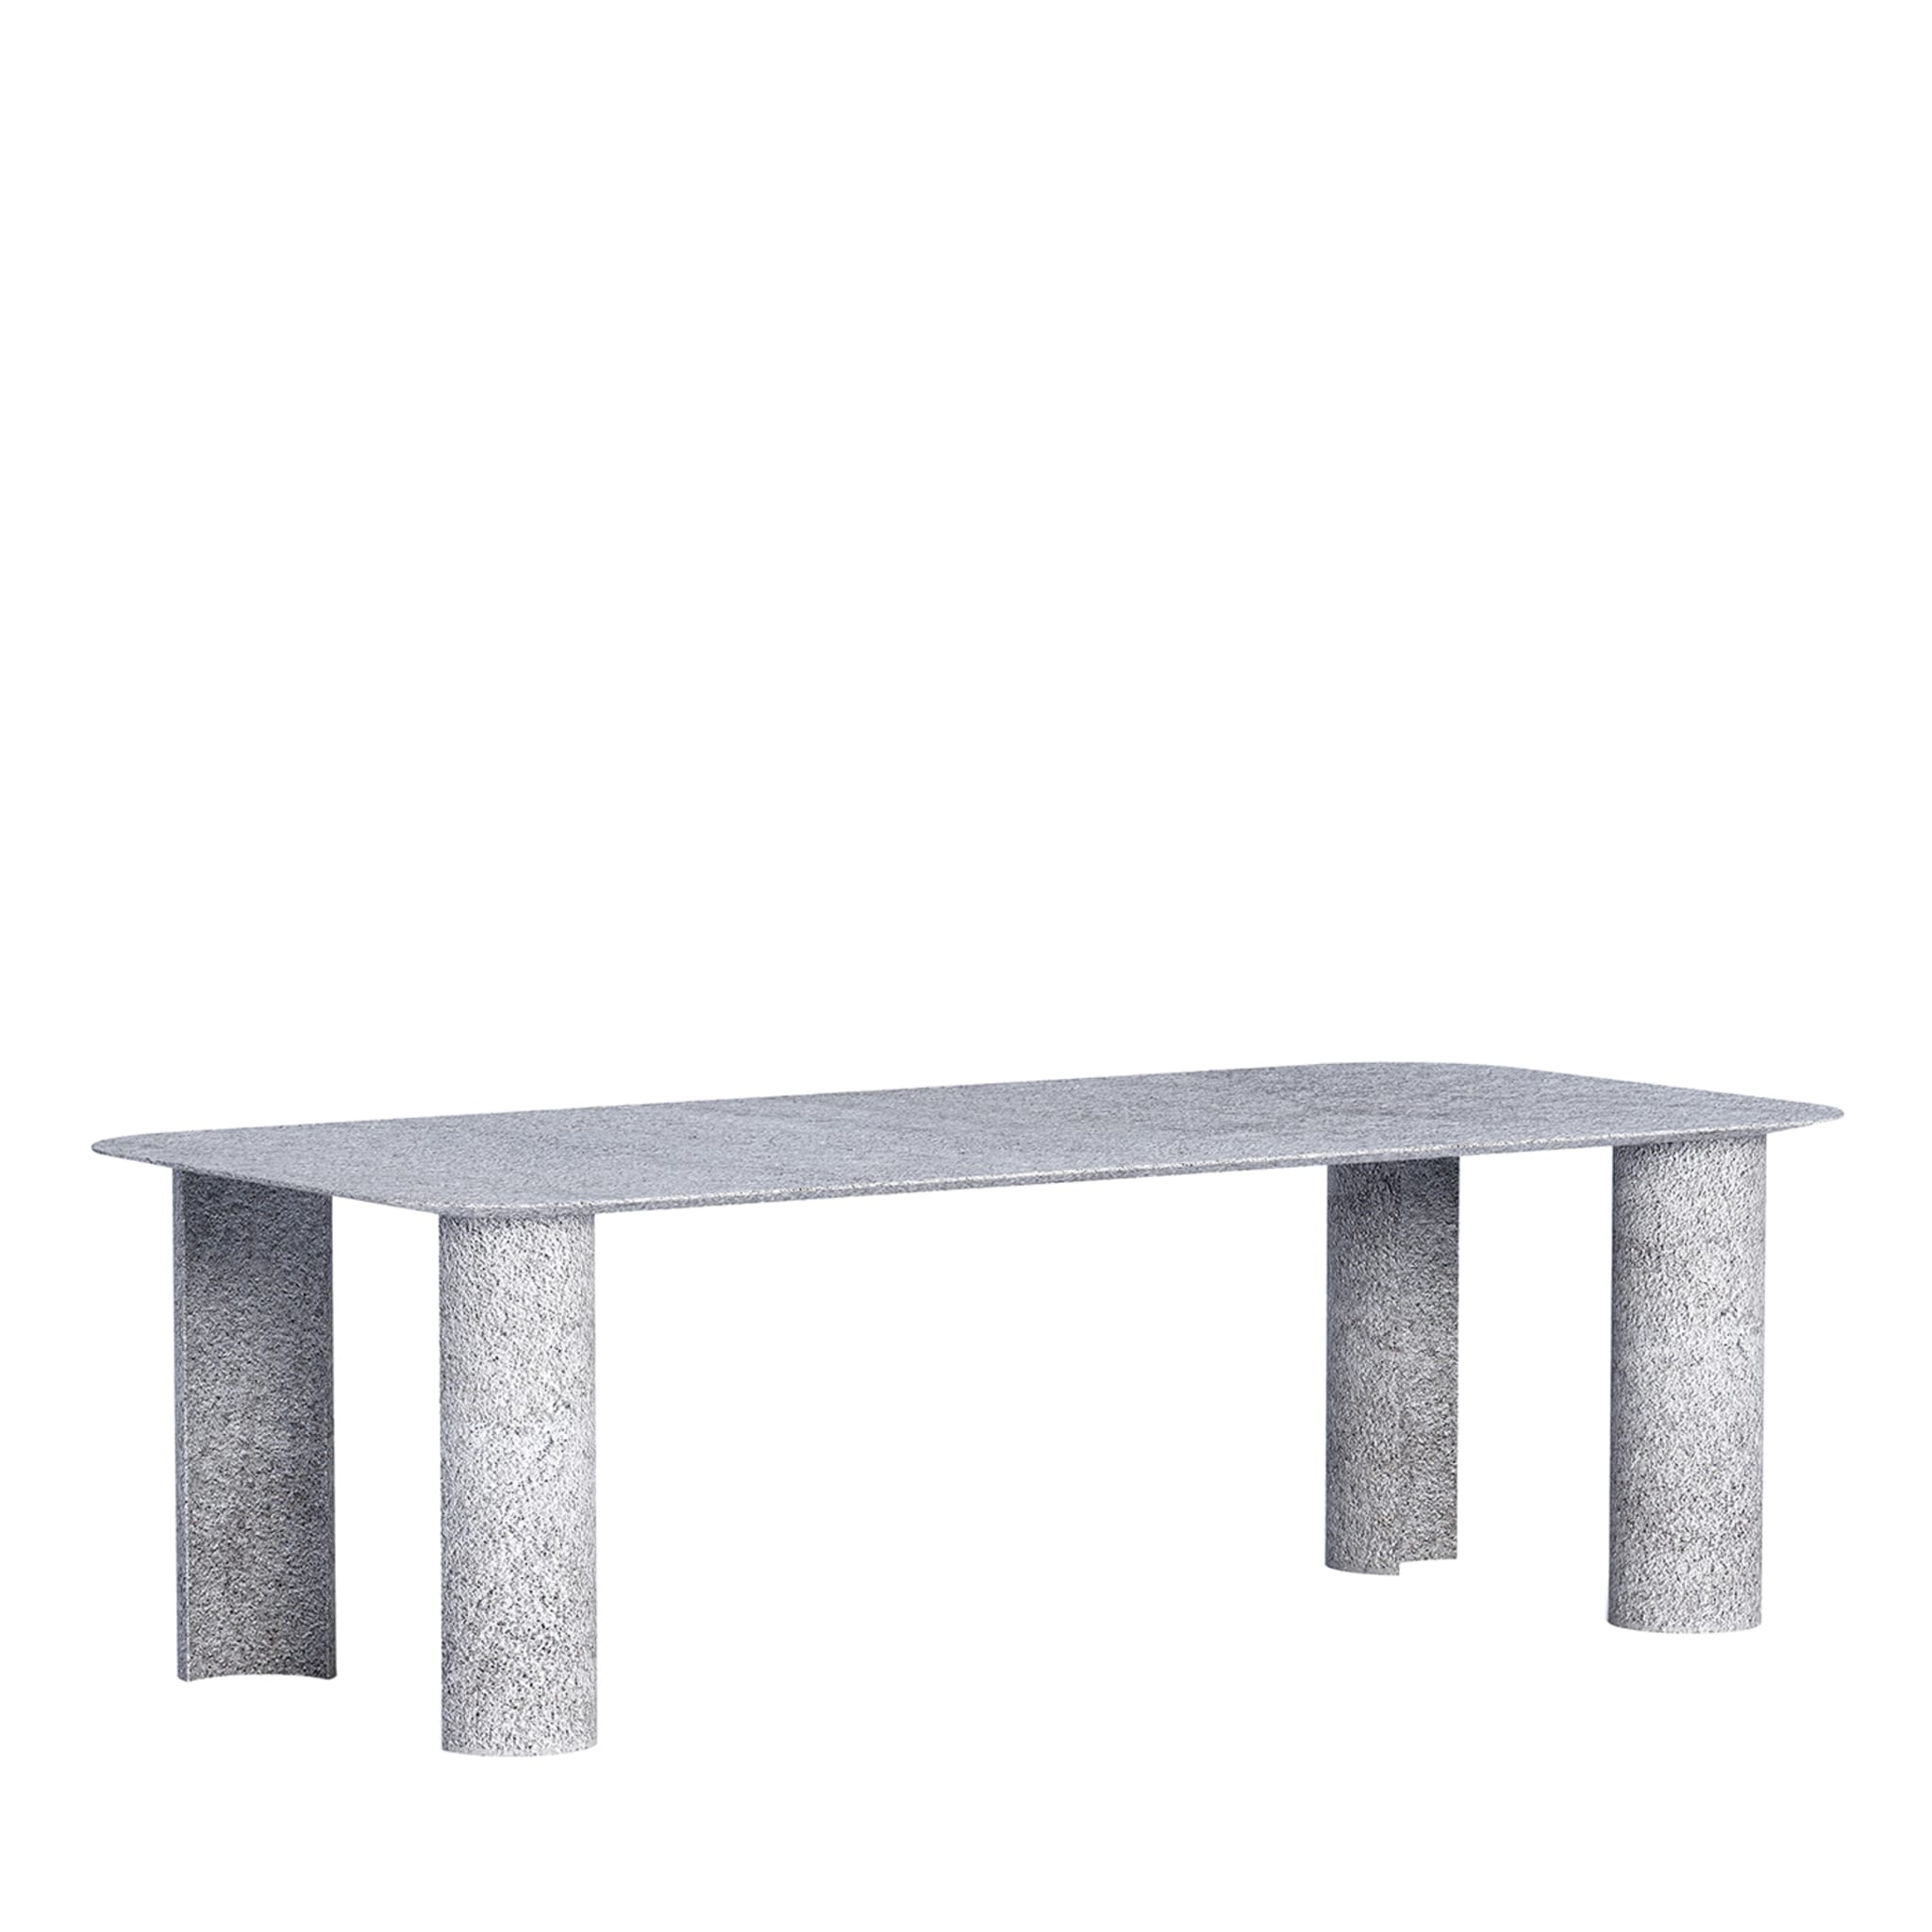 Moon Phase Gray Rectangular Outdoor Table - Main view